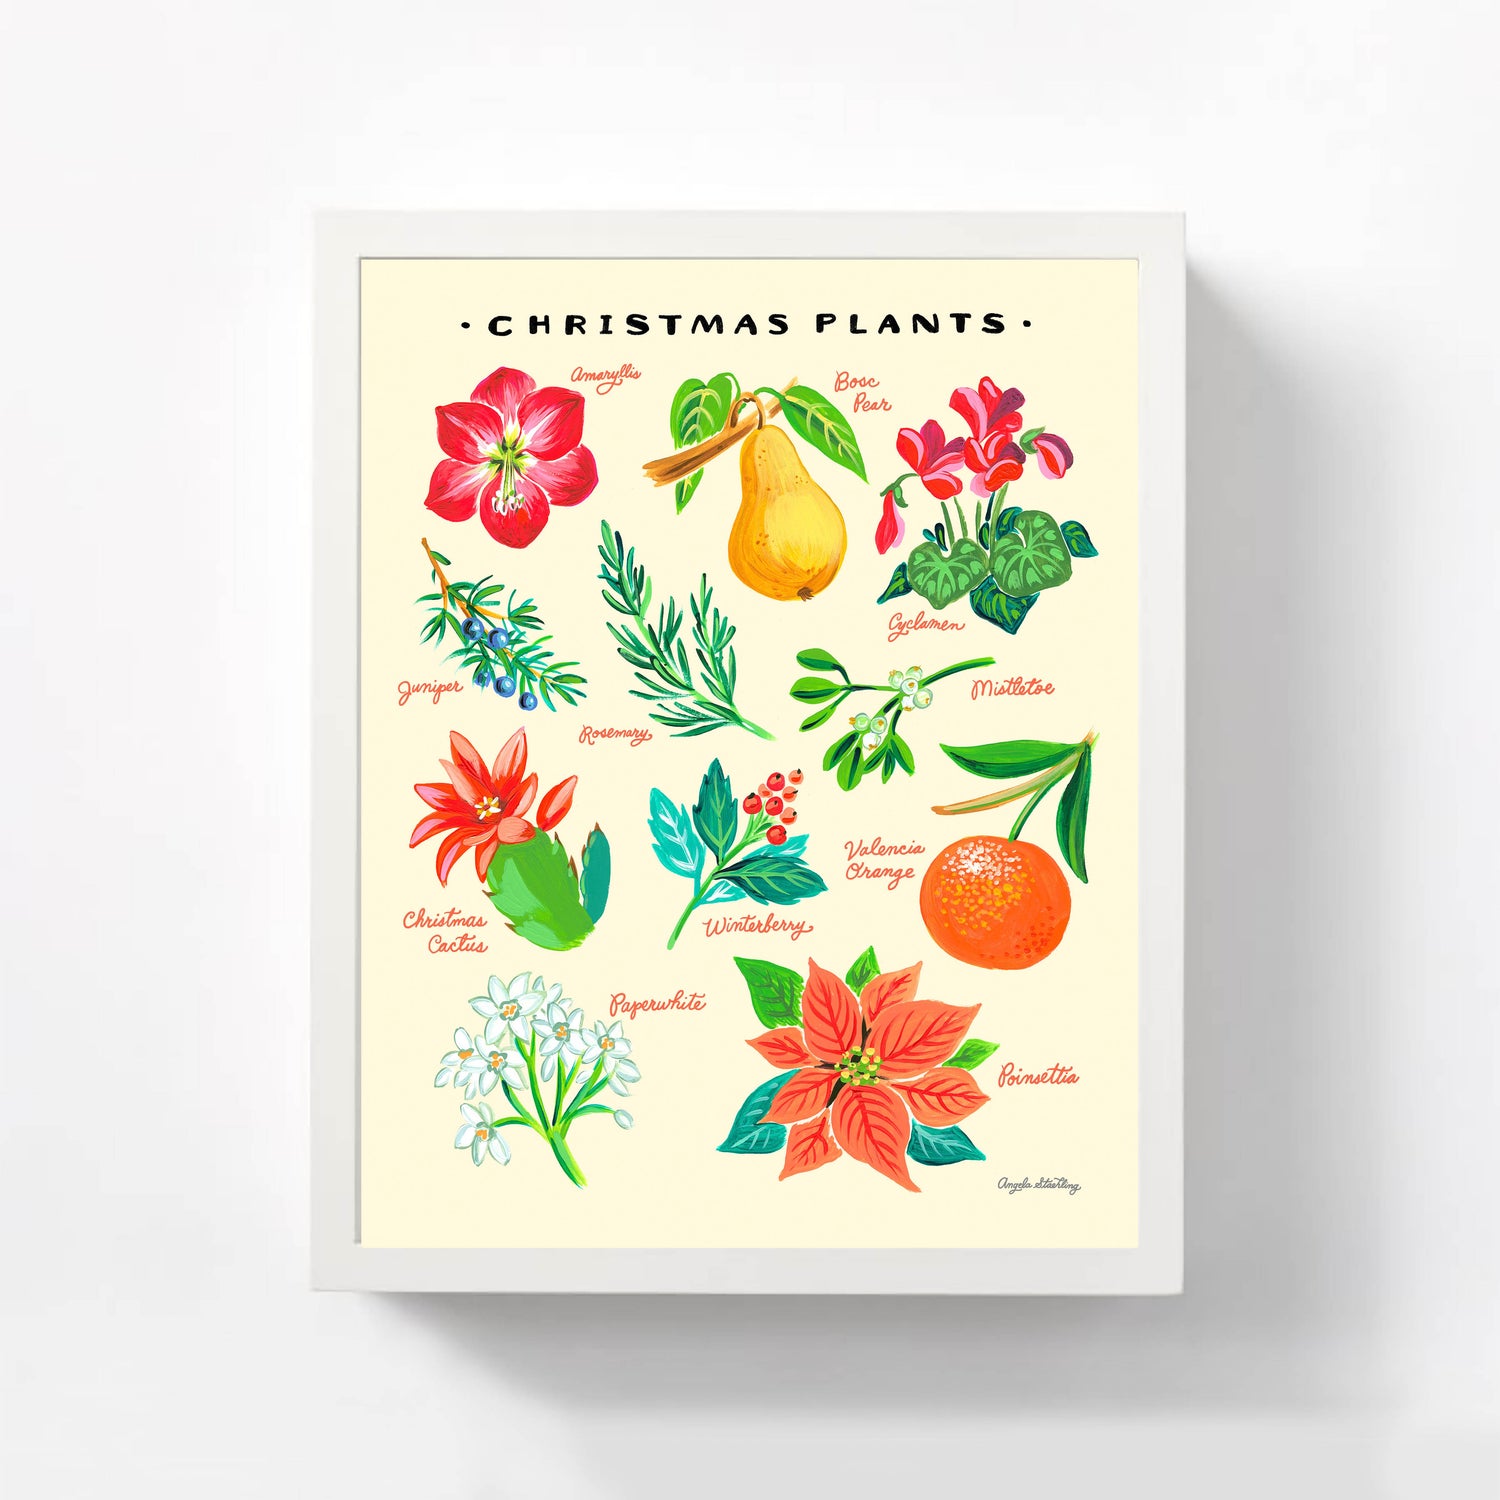 Christmas Plants Illustration with poinsettia, amaryllis, paper whites, and holly